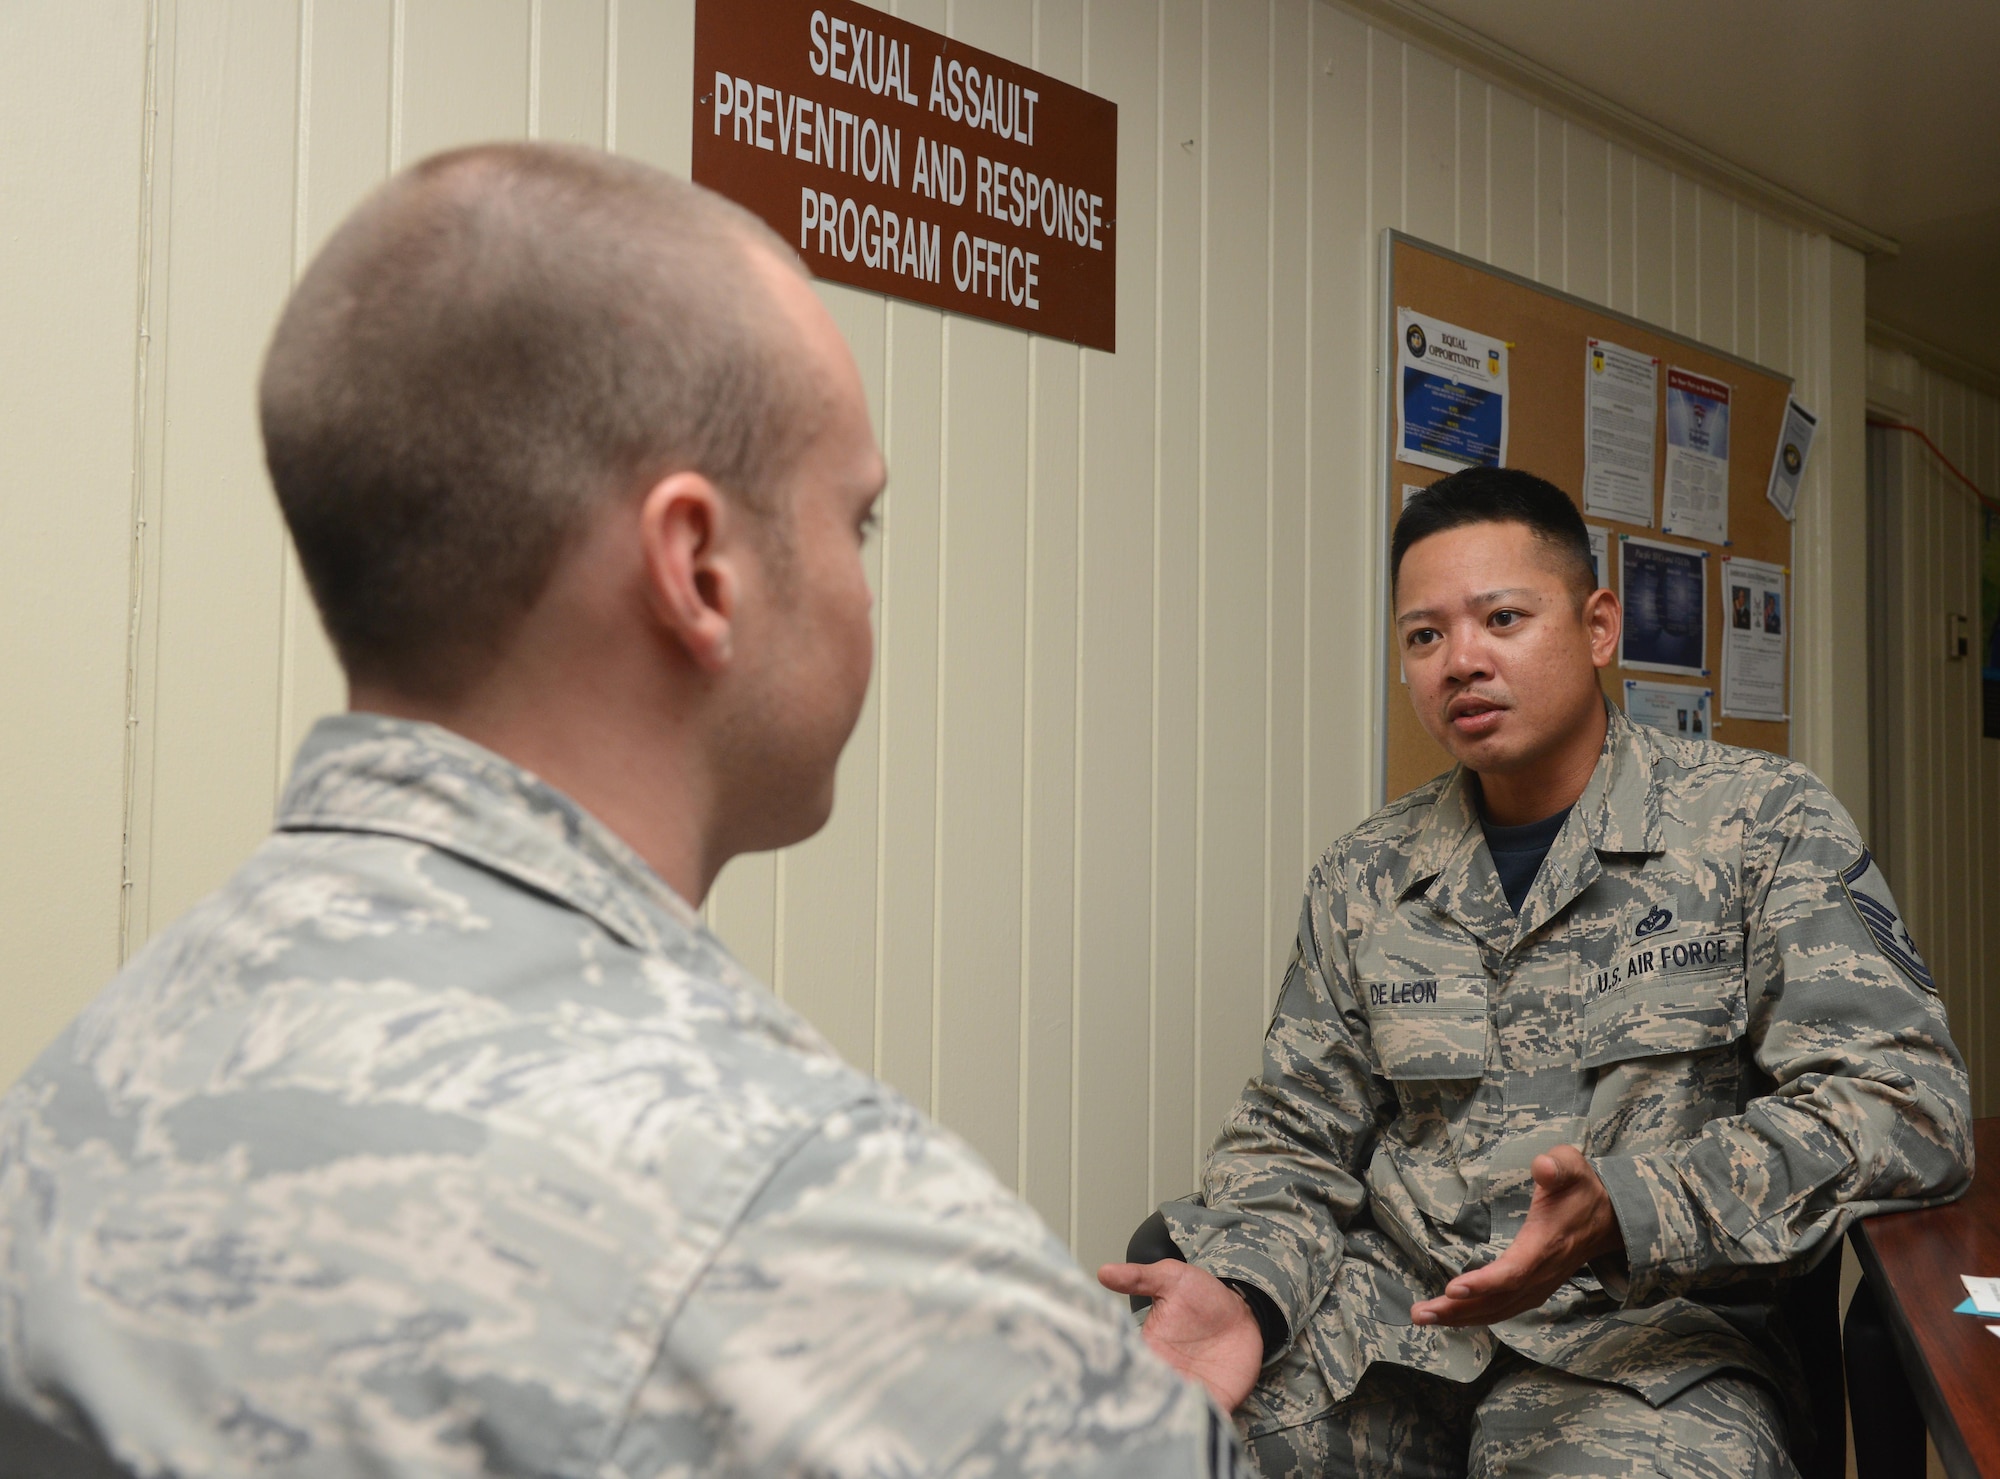 Master Sgt. Dan De Leon, 36th Civil Engineer Squadron NCO in charge of planning, who is also a part-time victim advocate, speaks to an Air Force member about Sexual Assault Prevention and Response program Jan. 20, 2016, on Andersen Air Force Base, Guam. Victim advocates are trained to respond as support for sexual assault victims, helping them through the investigation and providing resources to assist them in making informed decisions about their case. (U.S. Air Force photo/Airman 1st Class Arielle Vasquez)